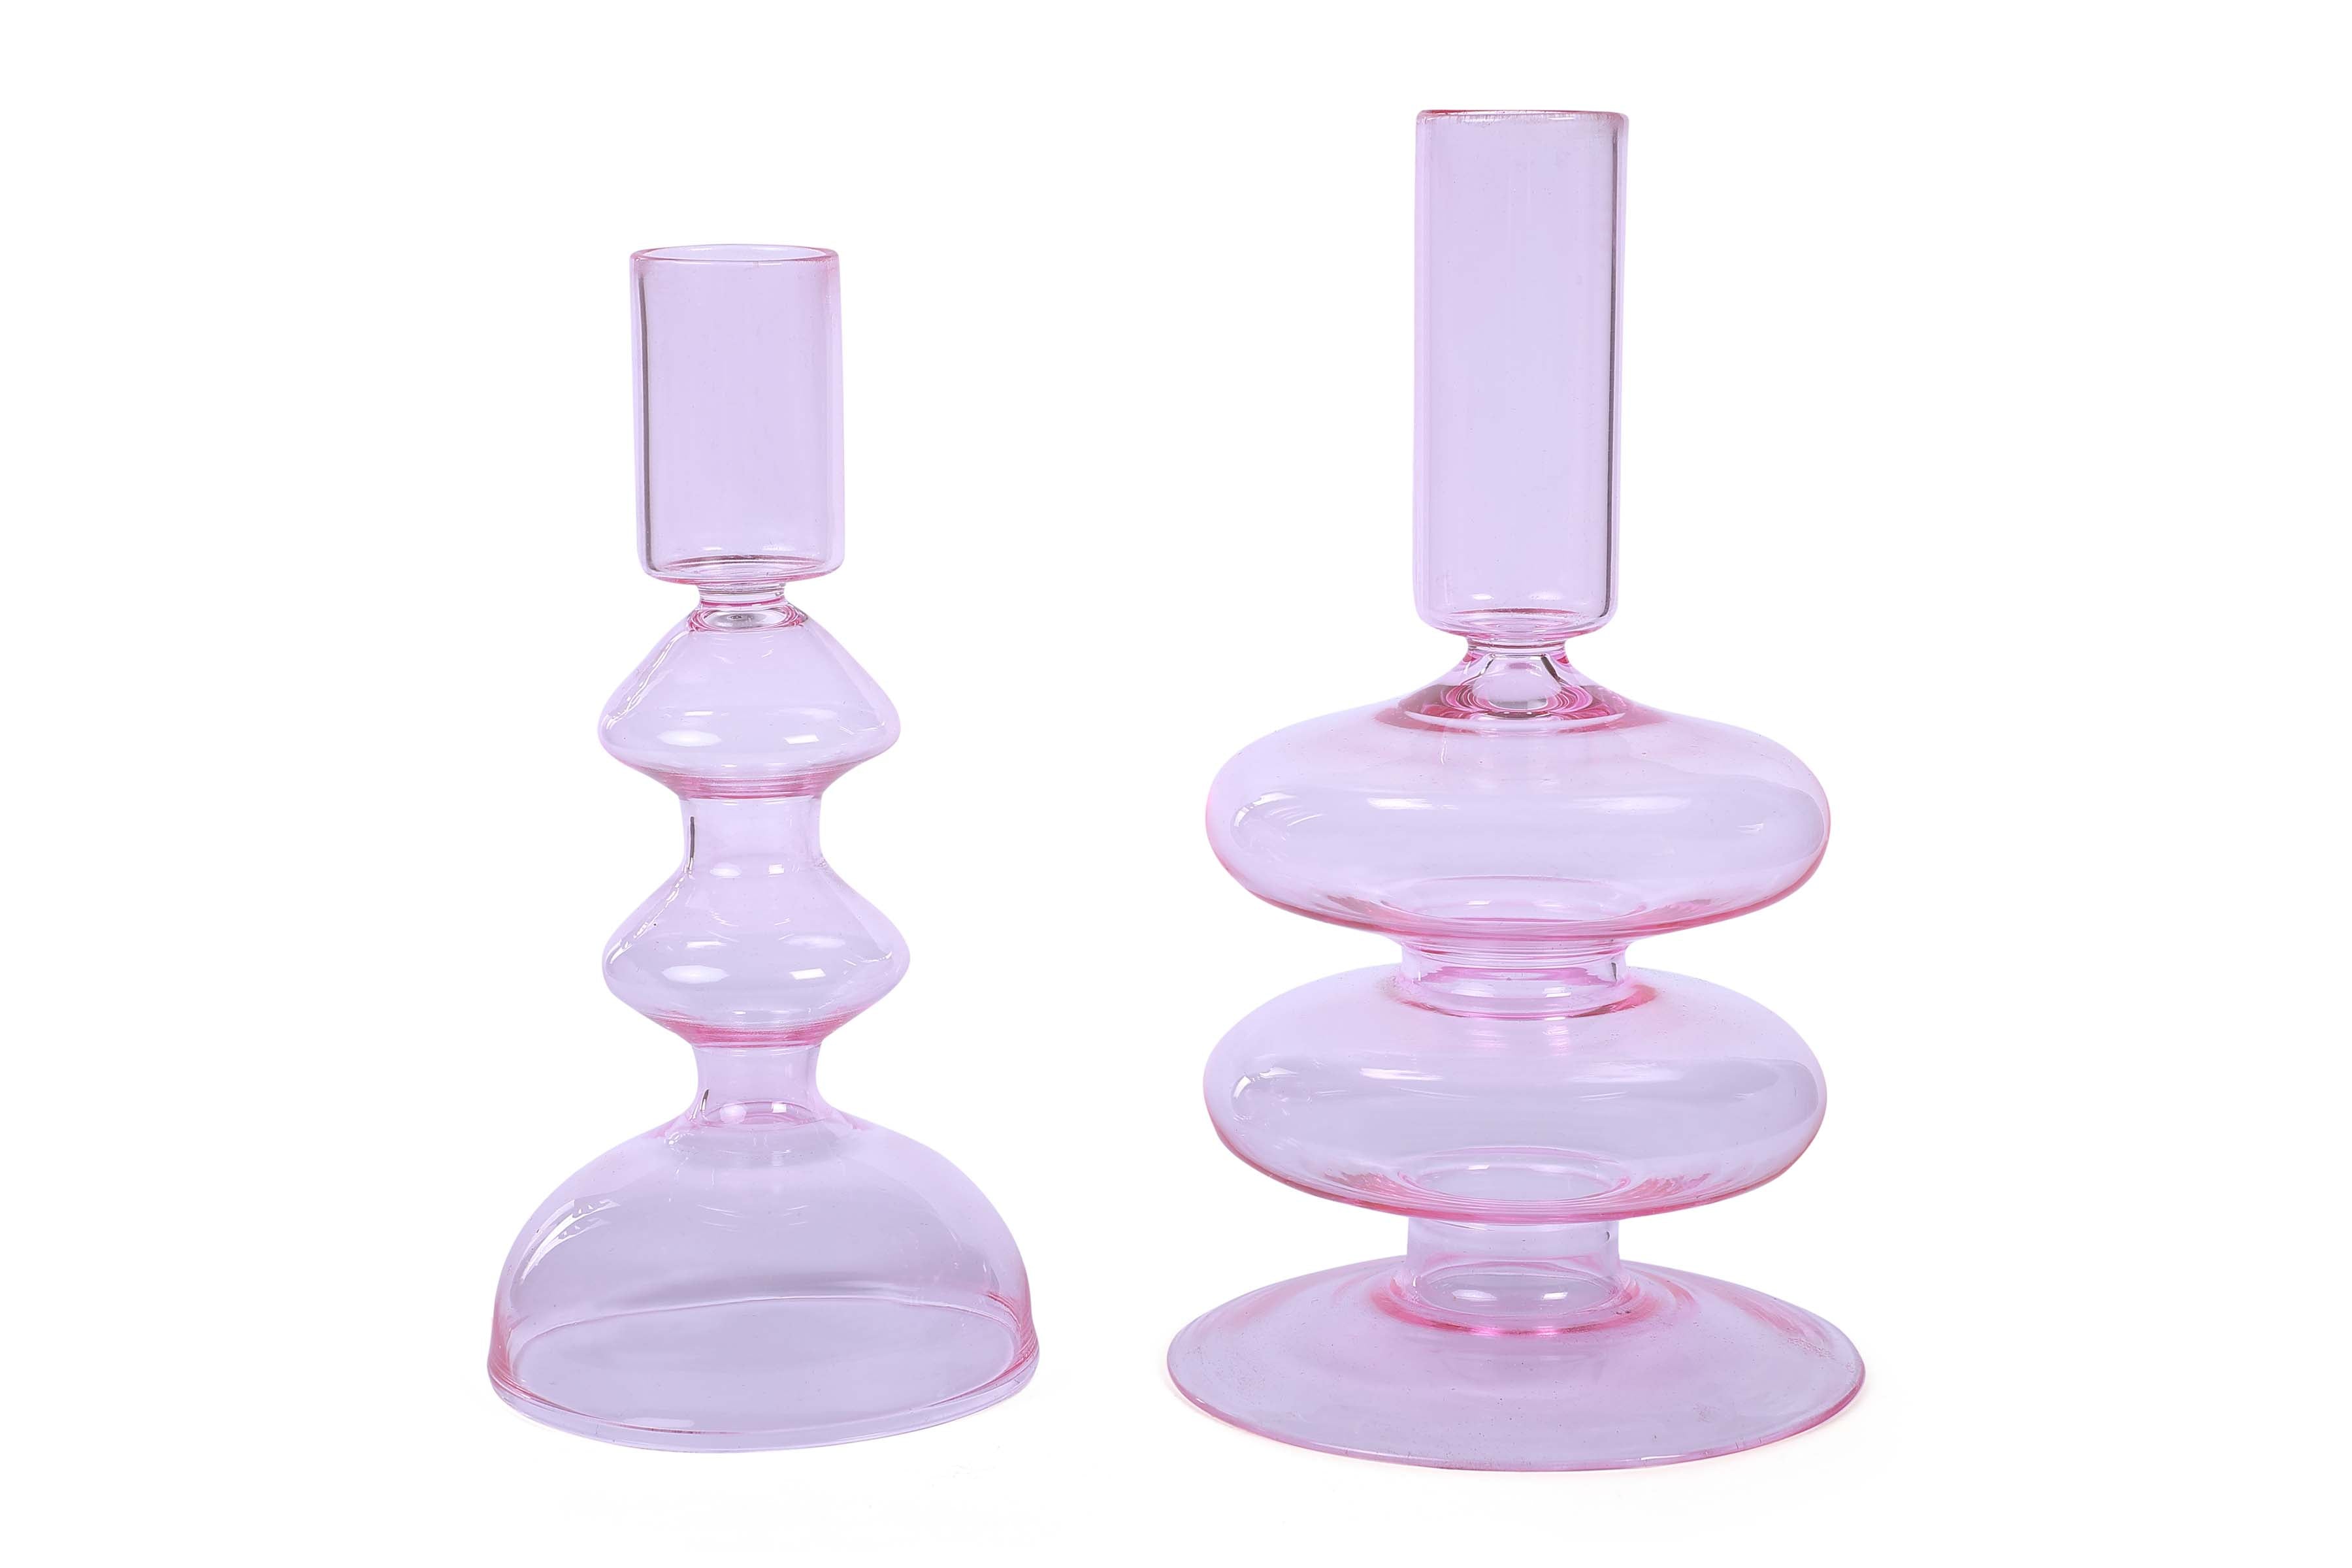 Retro Wavy Glass Candle Holder- 7 x3.5 Inches_Pink (Set of 2)